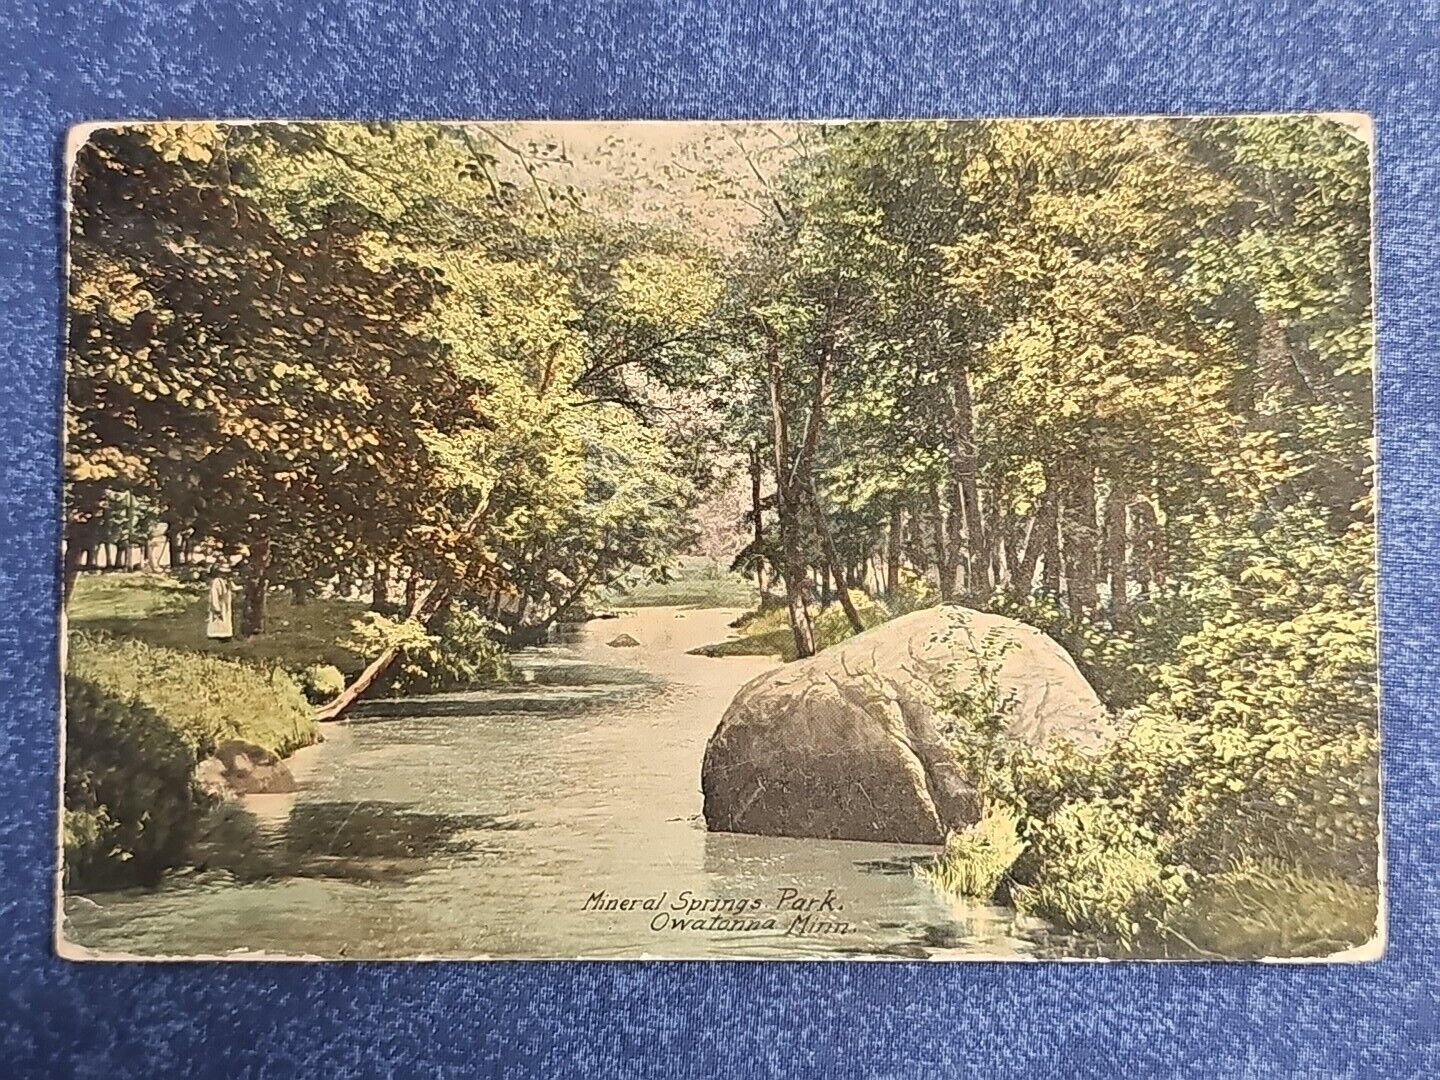 Vintage Mineral Springs Park Owatonna Minnesota 1916 Posted Postcard A642